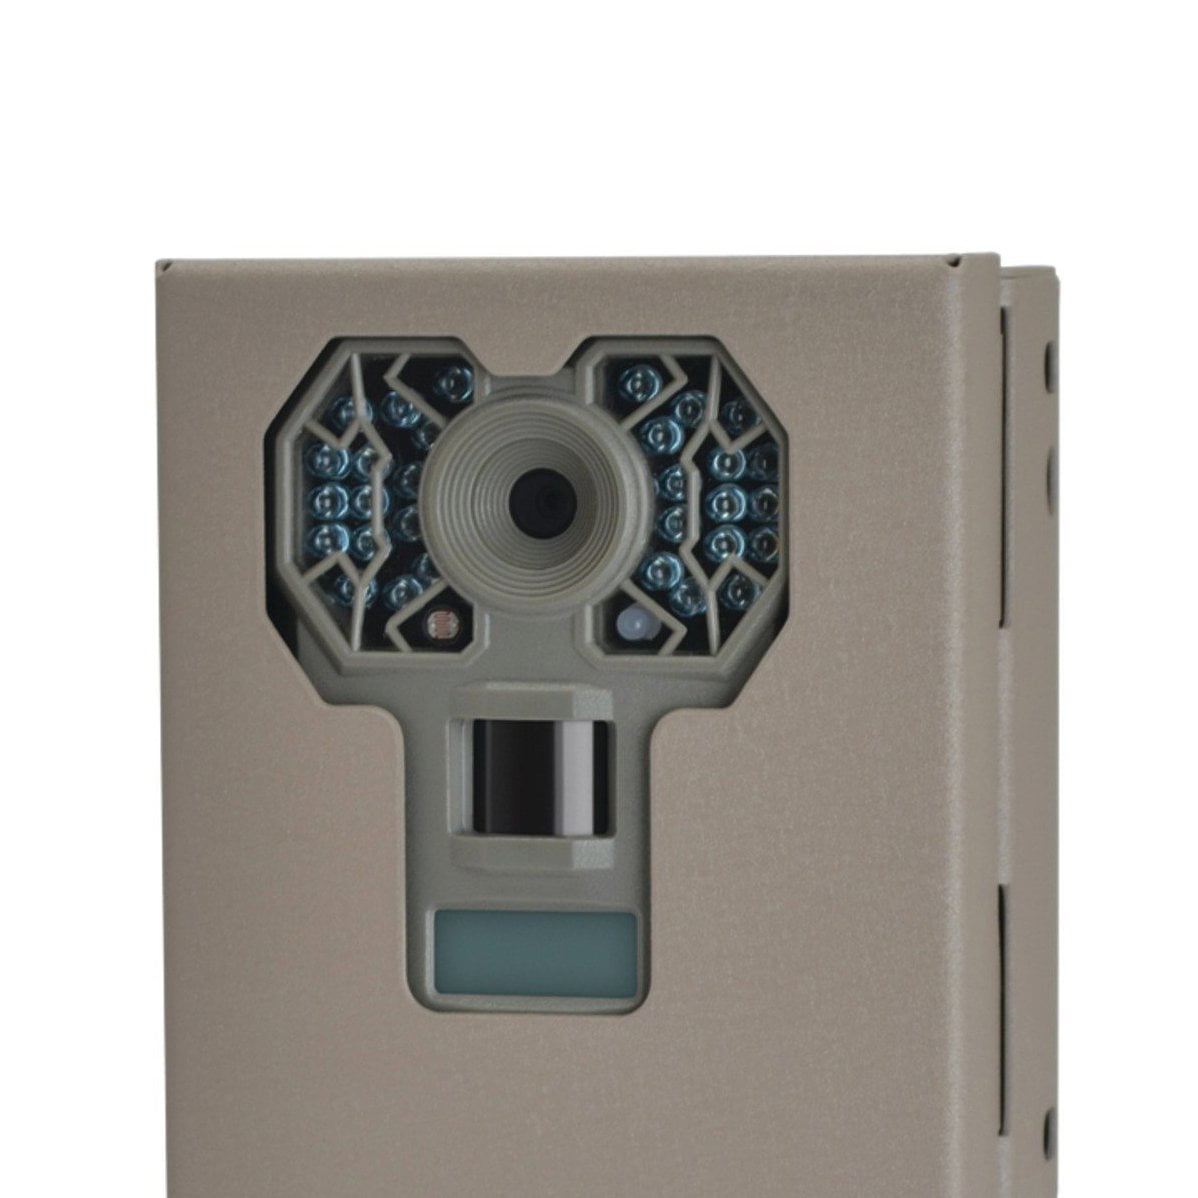 1003574 Stealth Cam Security/Bear Box for GX Series